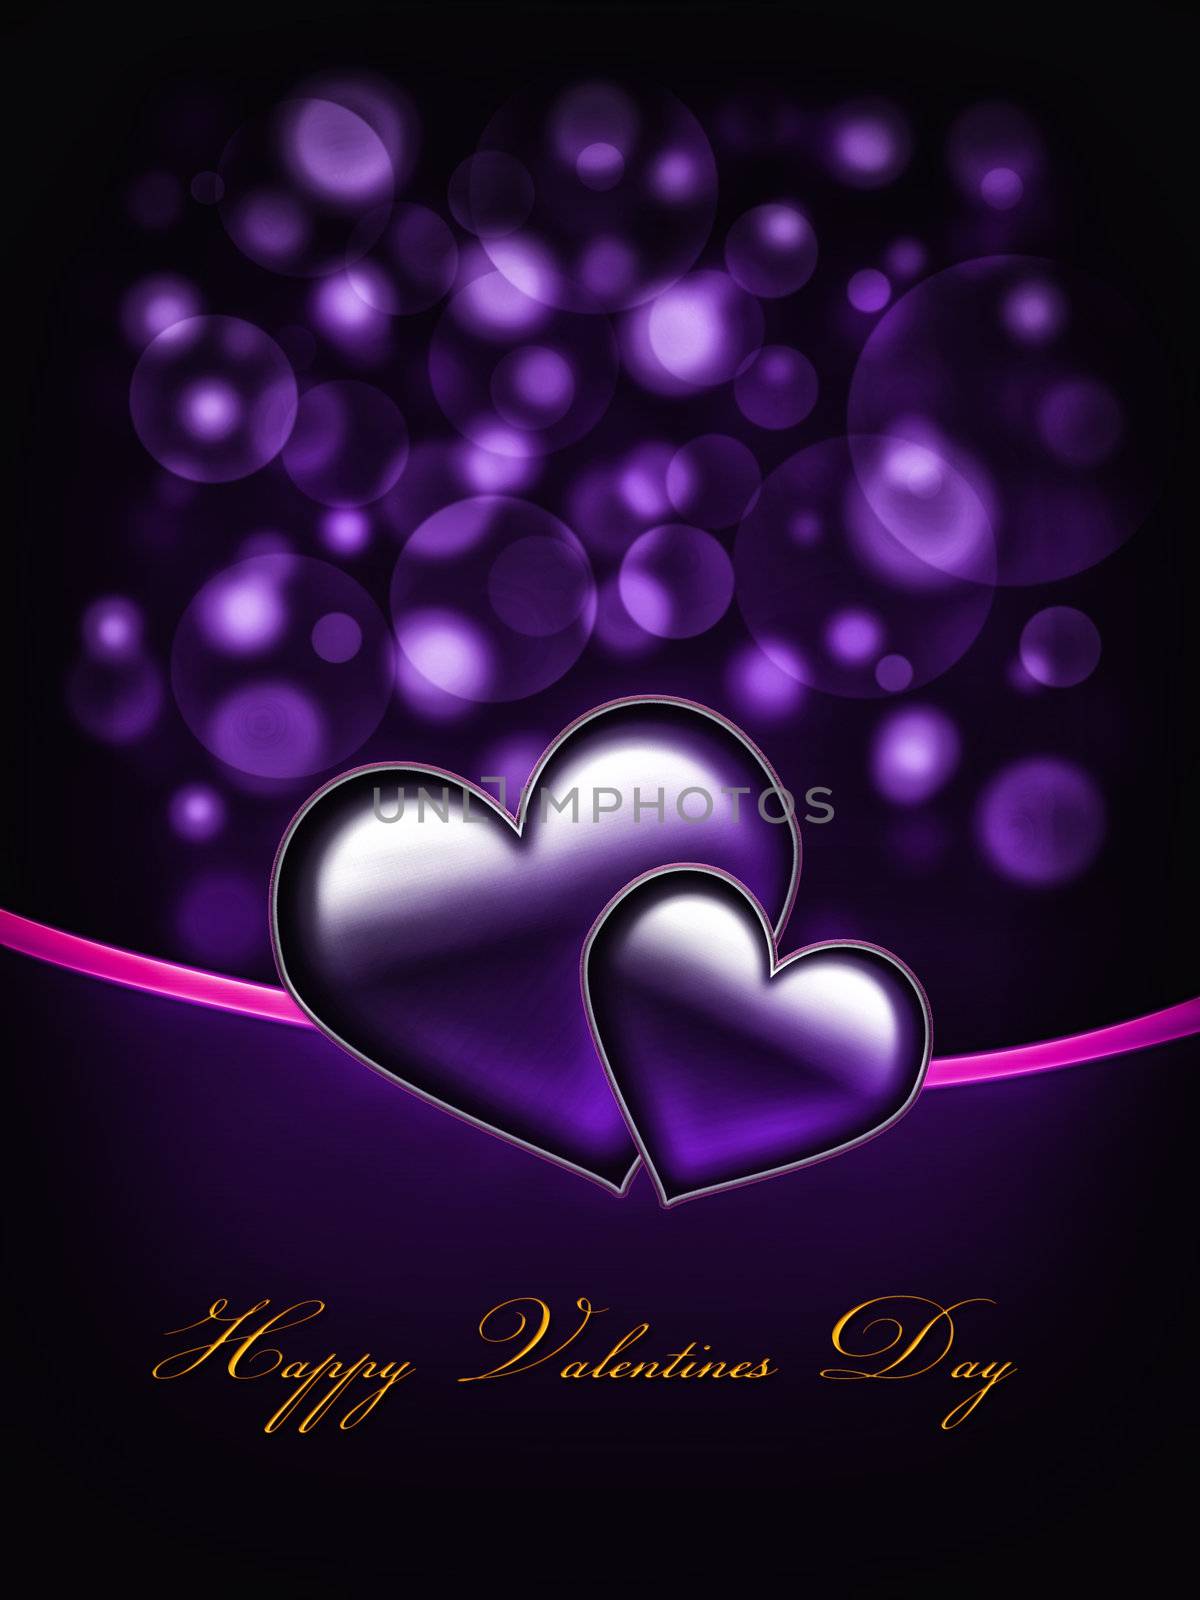 Valentines Day Card with golden Happy Valentines Day text and two big hearts - all in purple and pink